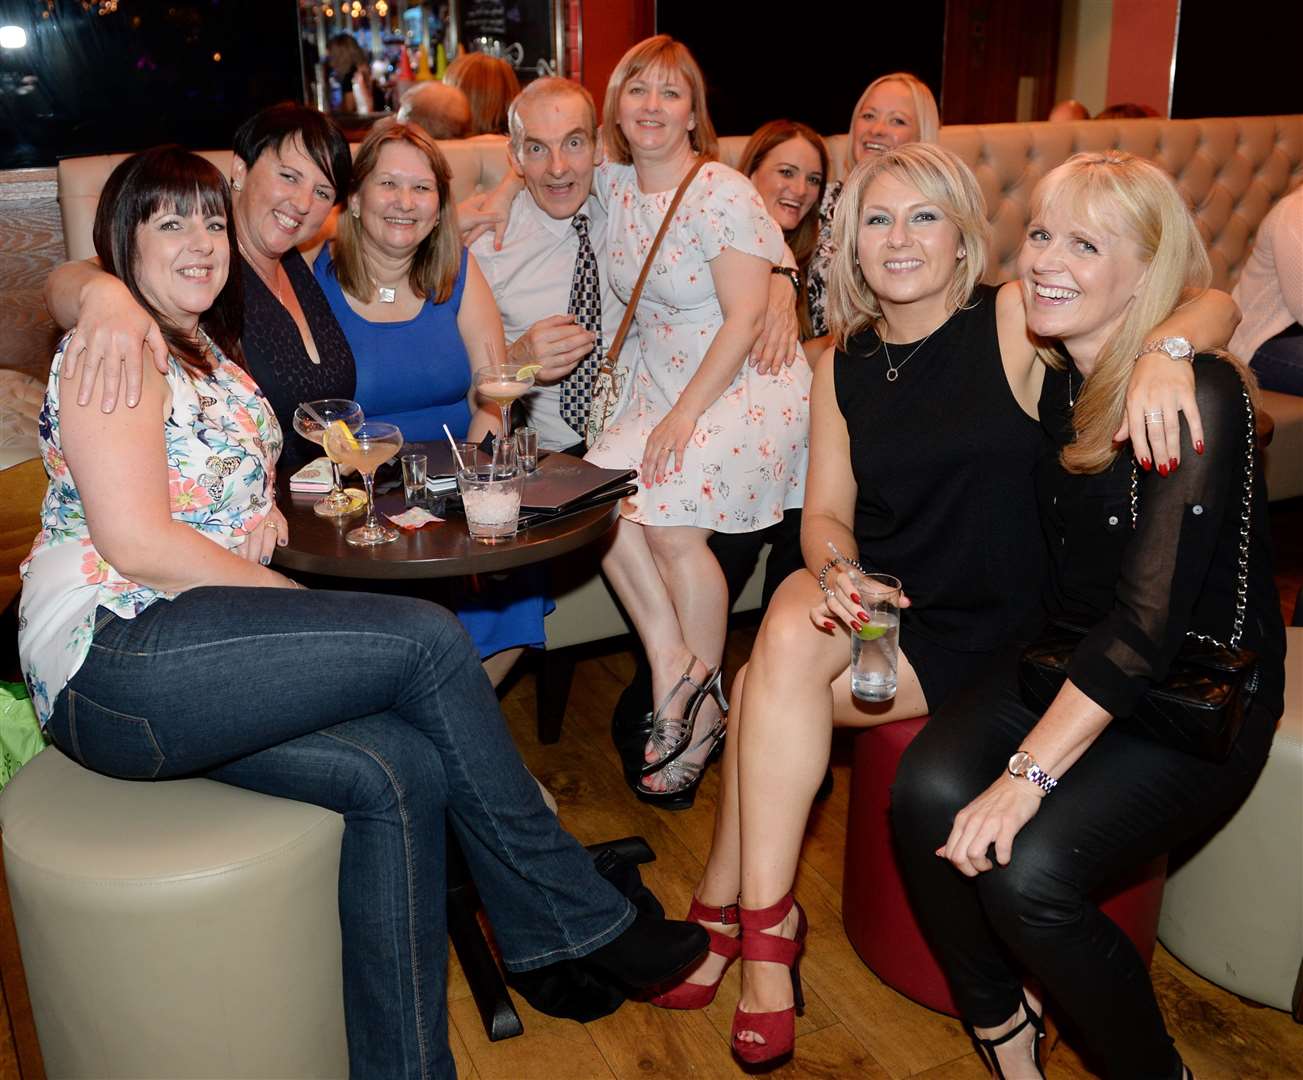 Picture: Alasdair Allen. Image No. 035029. Penny Williamson on her 50th birthday night out with friends.